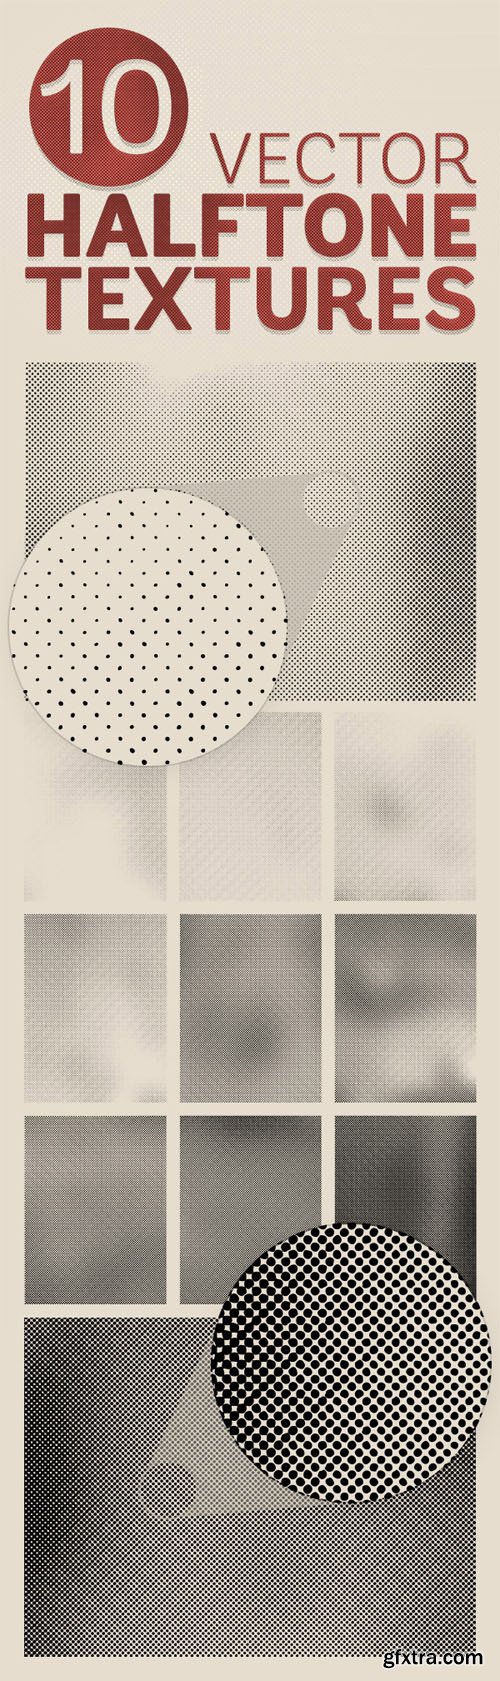 Detailed Vector Halftone Texture Backgrounds